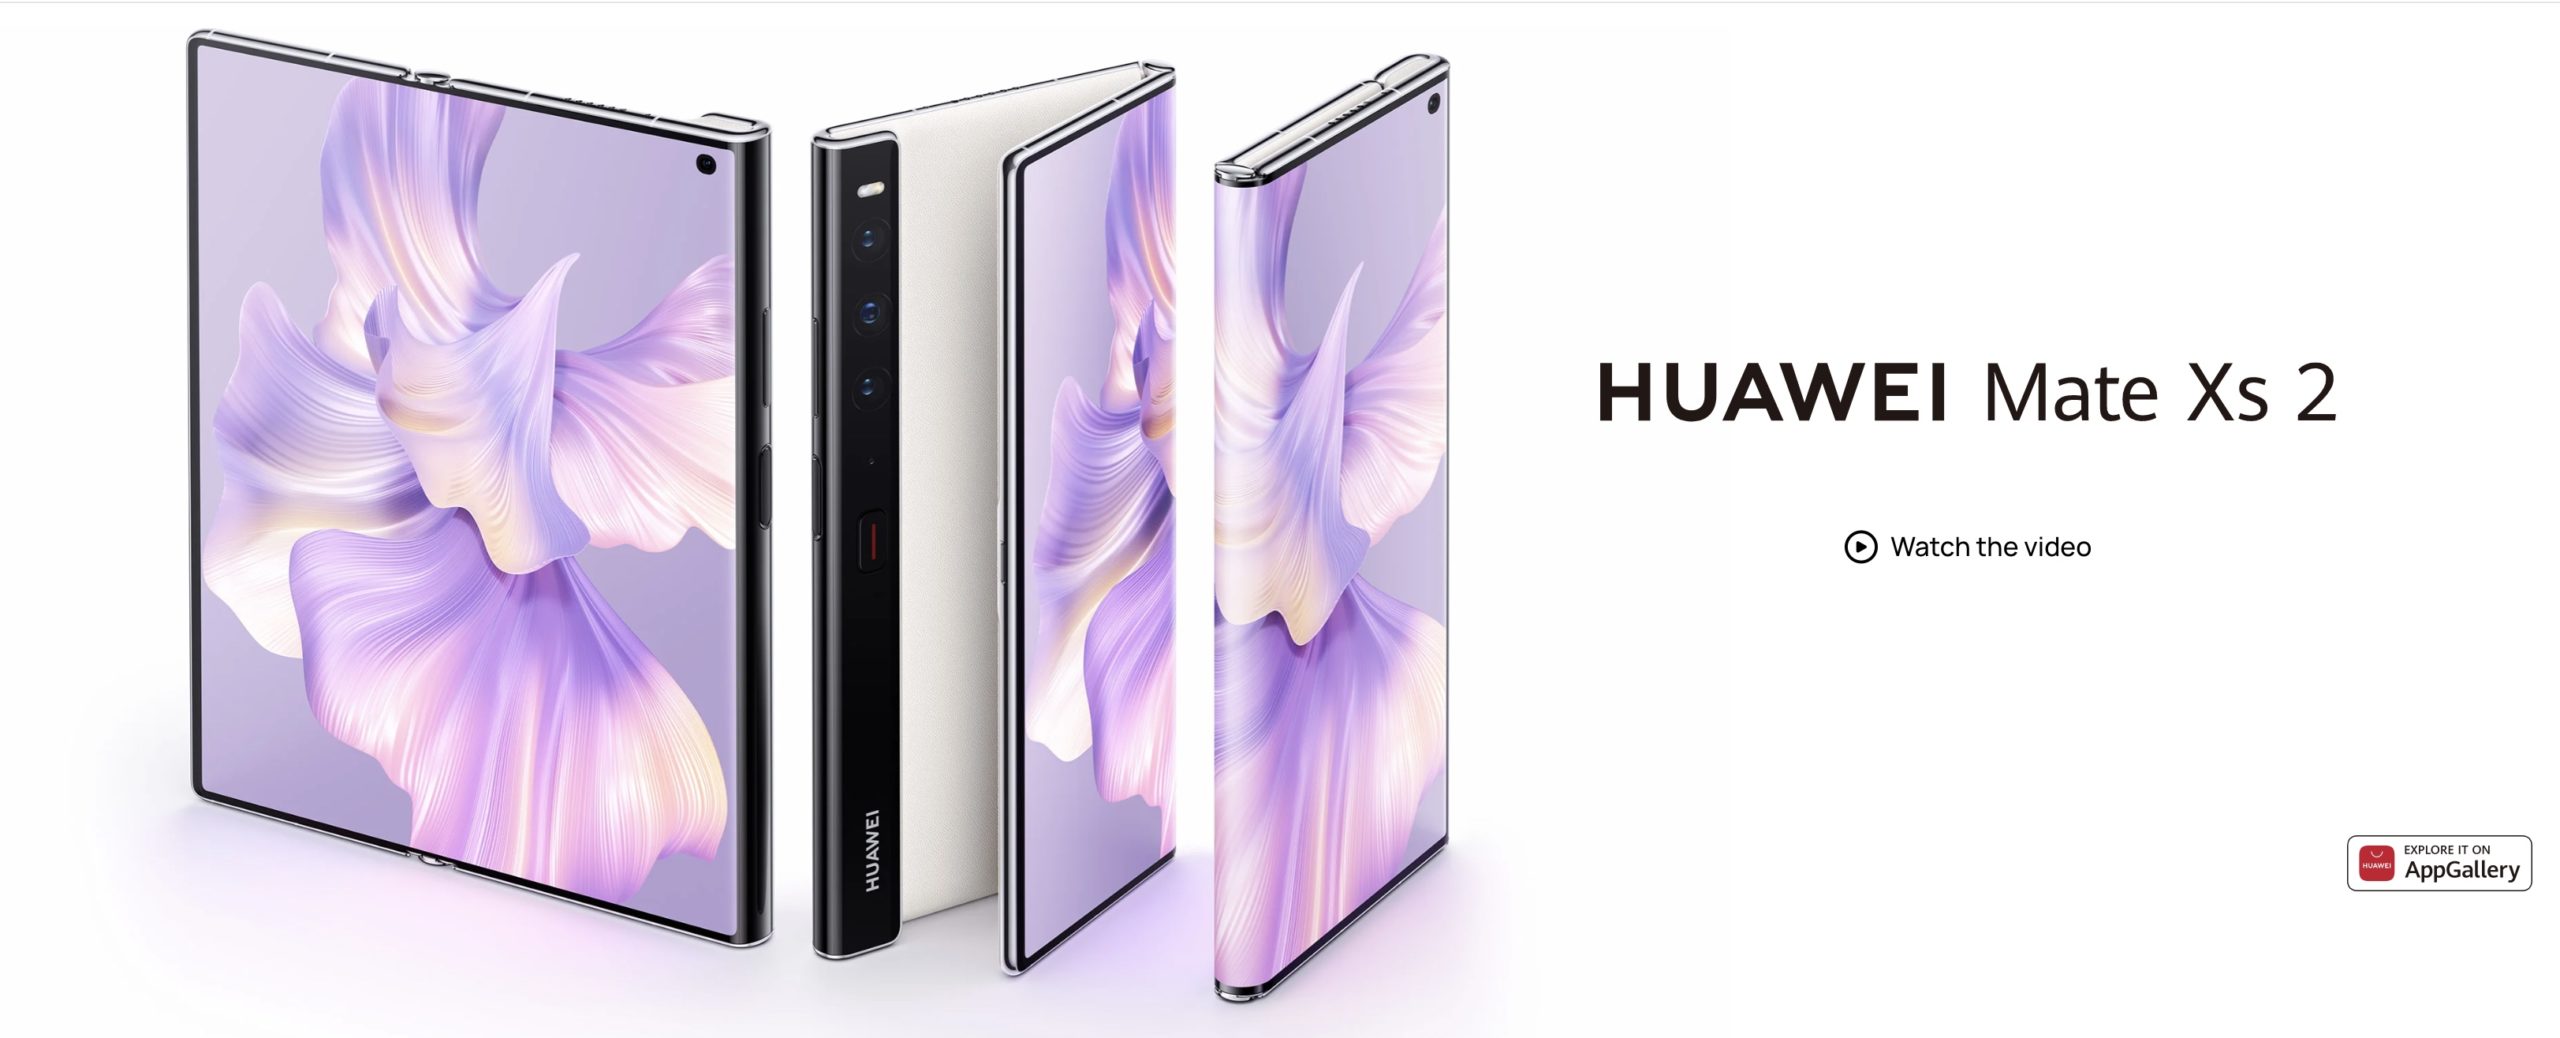 Our guide to picking a super flagship phone: HUAWEI Mate Xs 2 is the Ideal Foldable Phone: Ultra Light, Ultra Flat, Super Durable